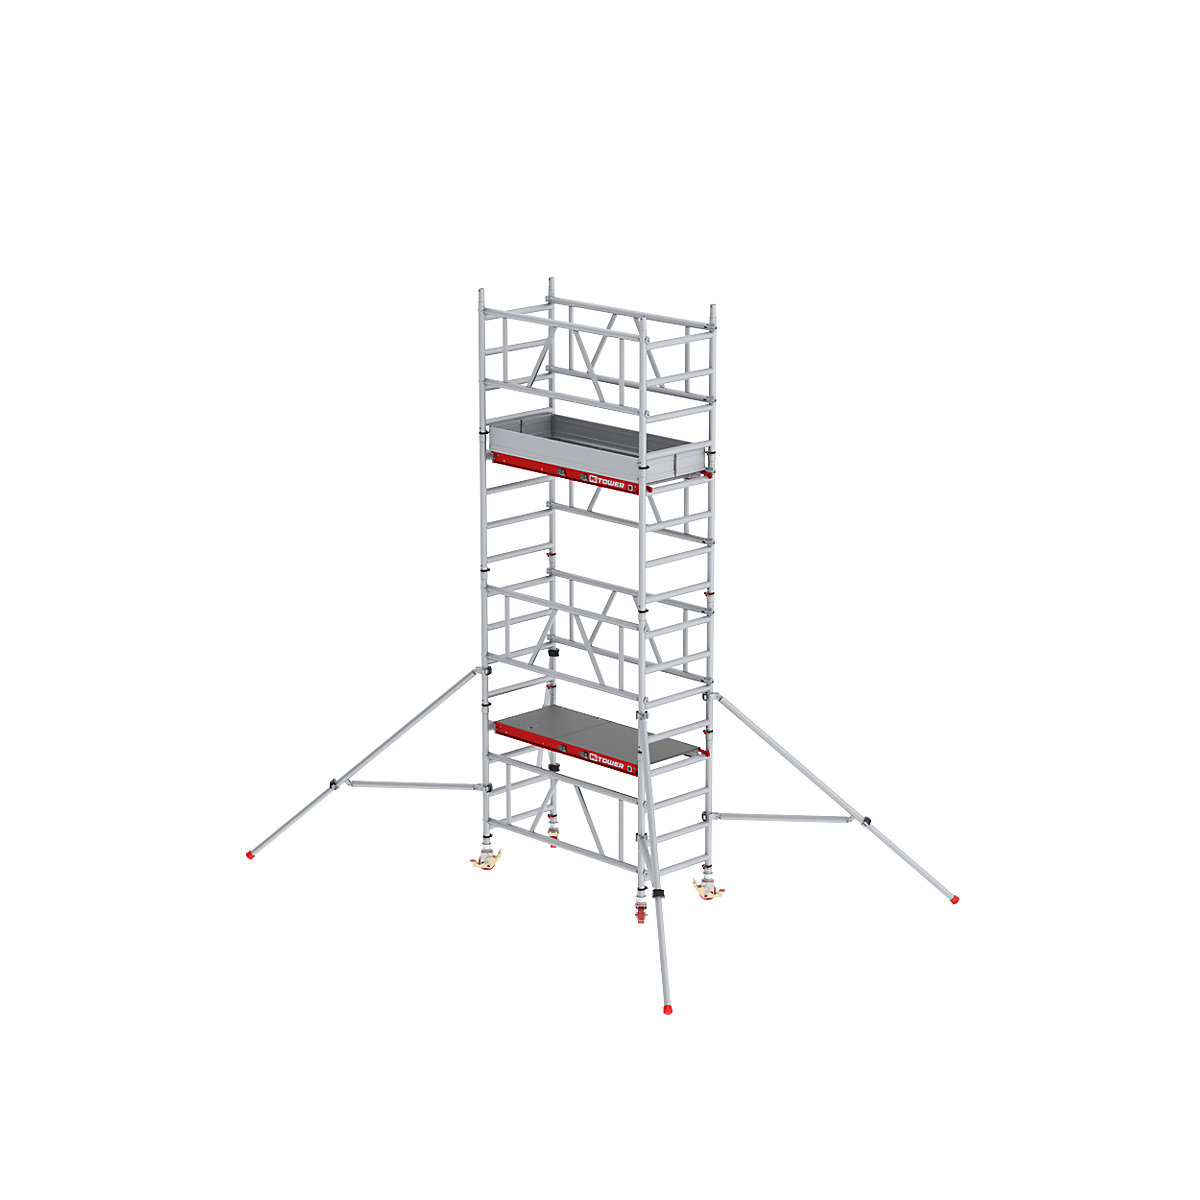 MiTOWER Plus quick assembly mobile access tower – Altrex, Fiber-Deck® platform, working height 5 m-3